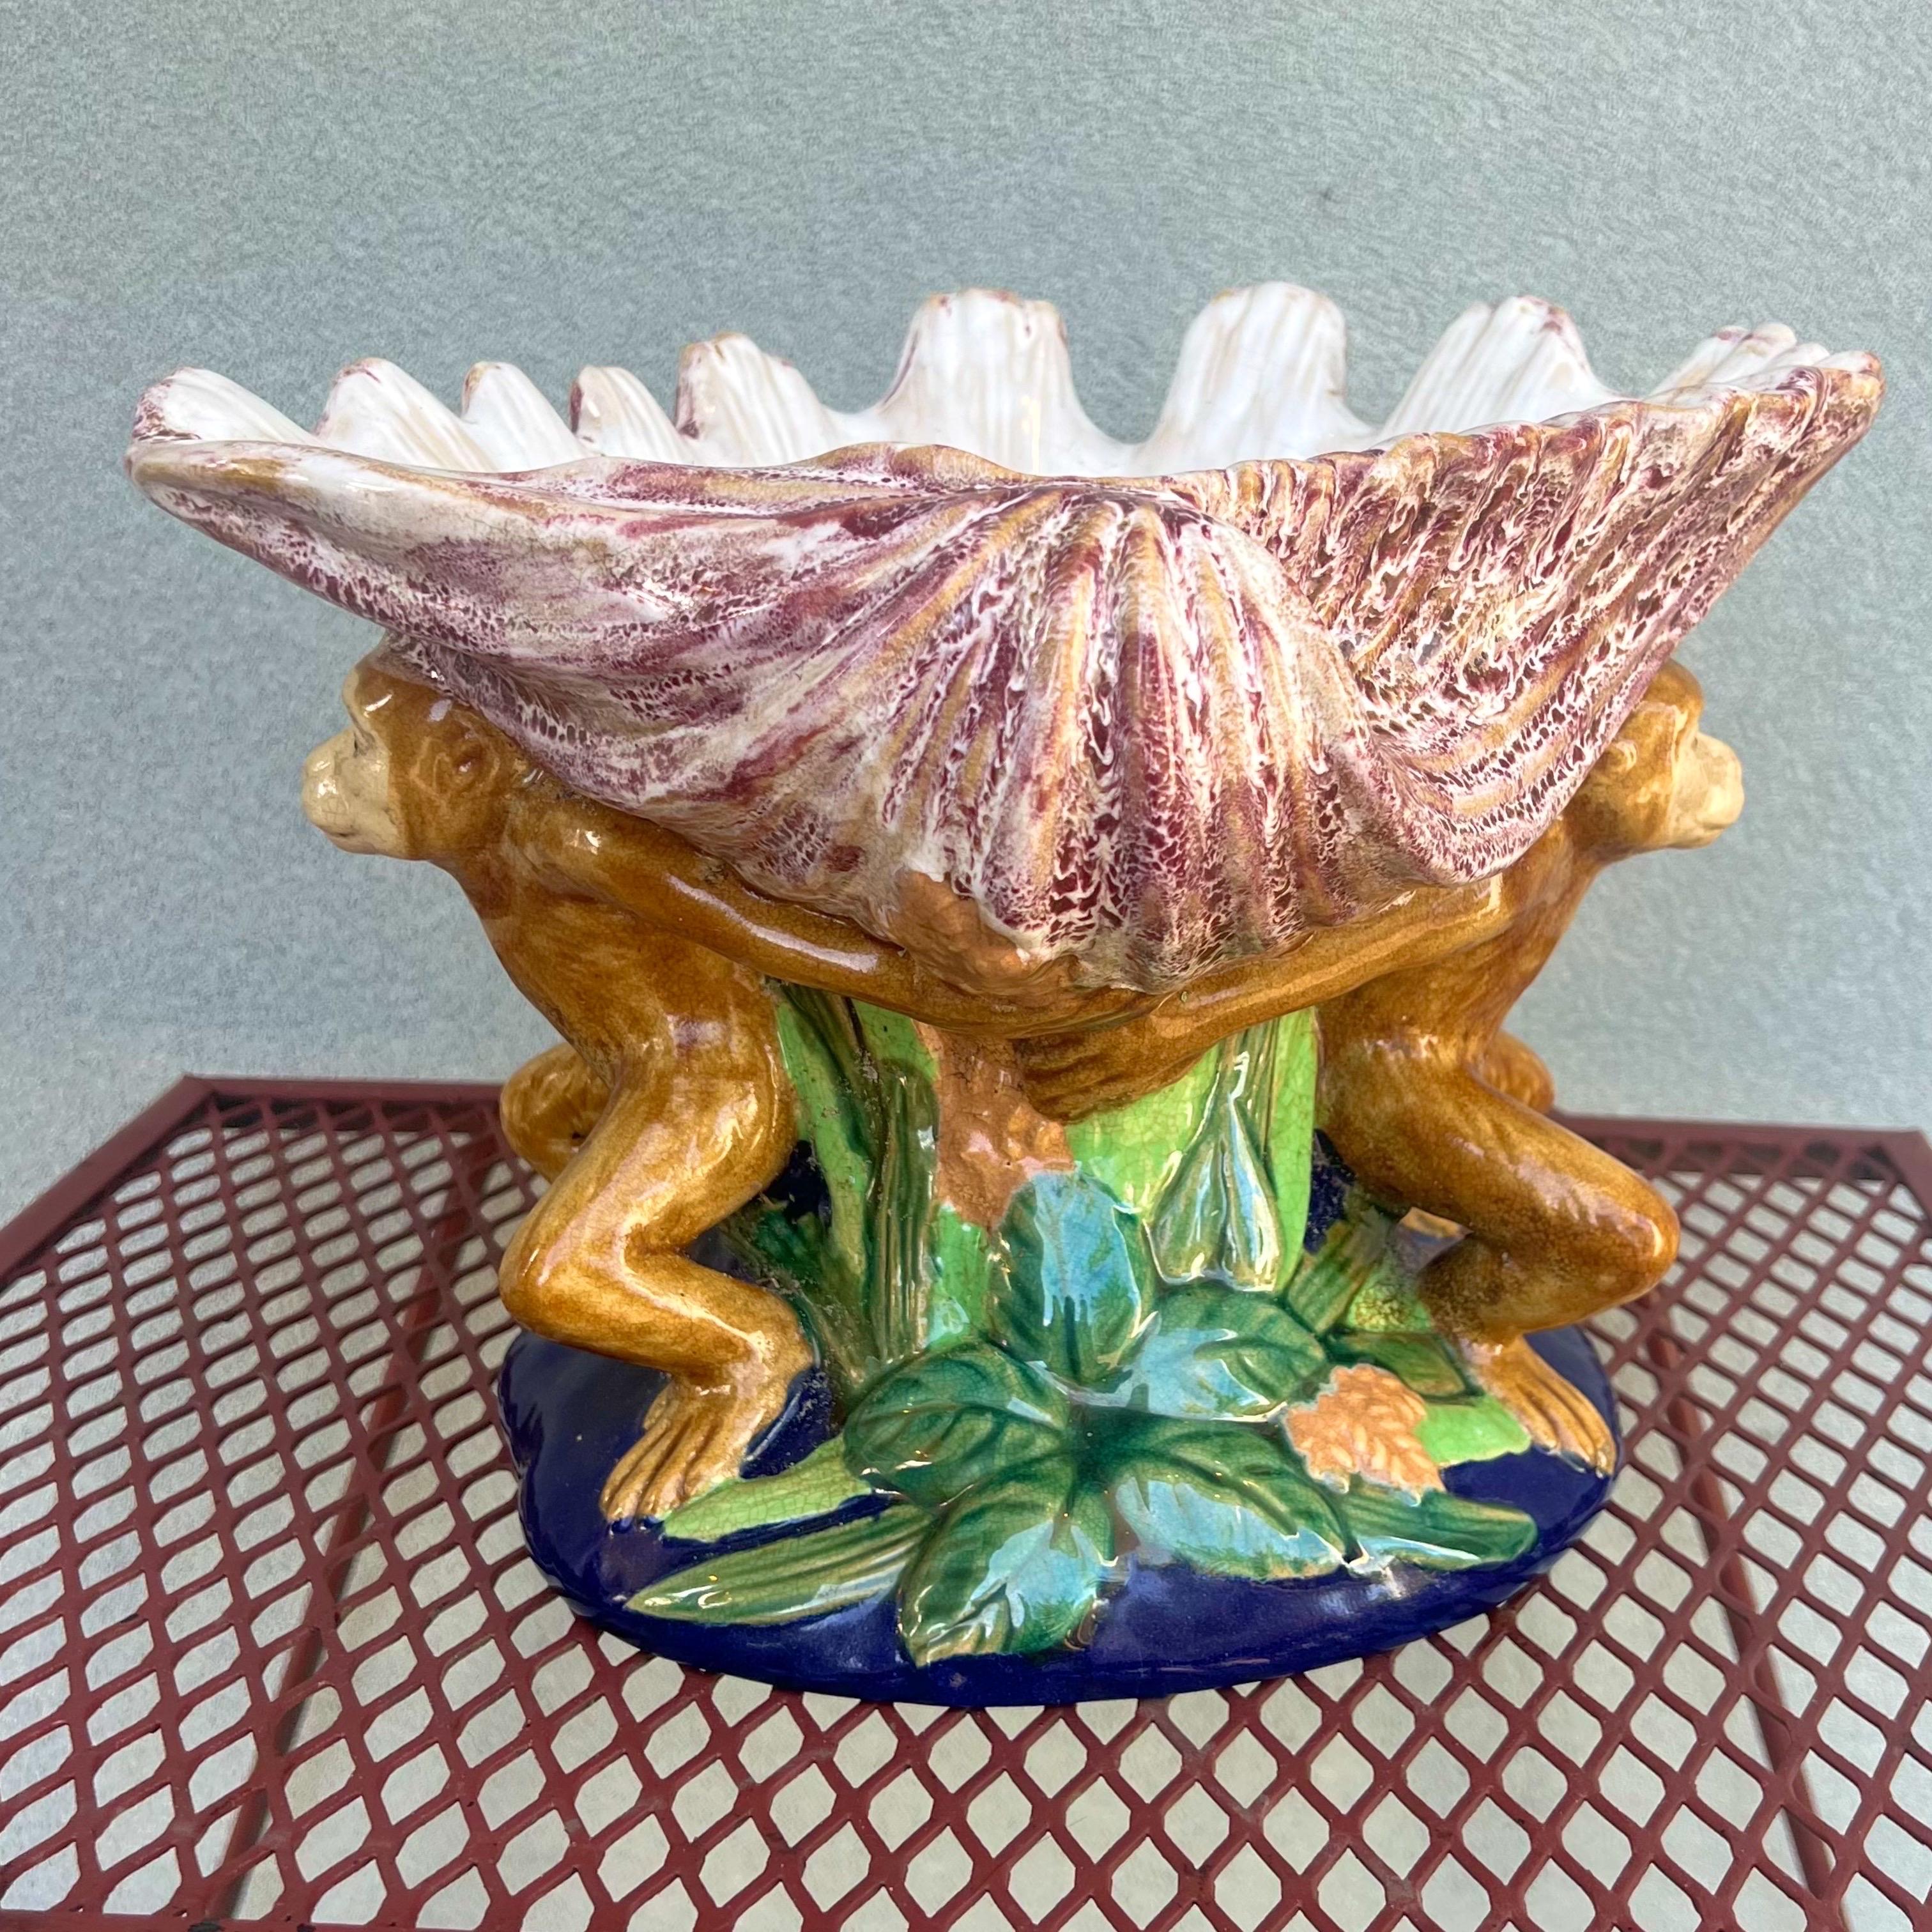 Vintage majolica style pedestal bowl with 2 cute monkeys holding up a large shell. A Very colorful piece with deep blues and a range of greens and reds.